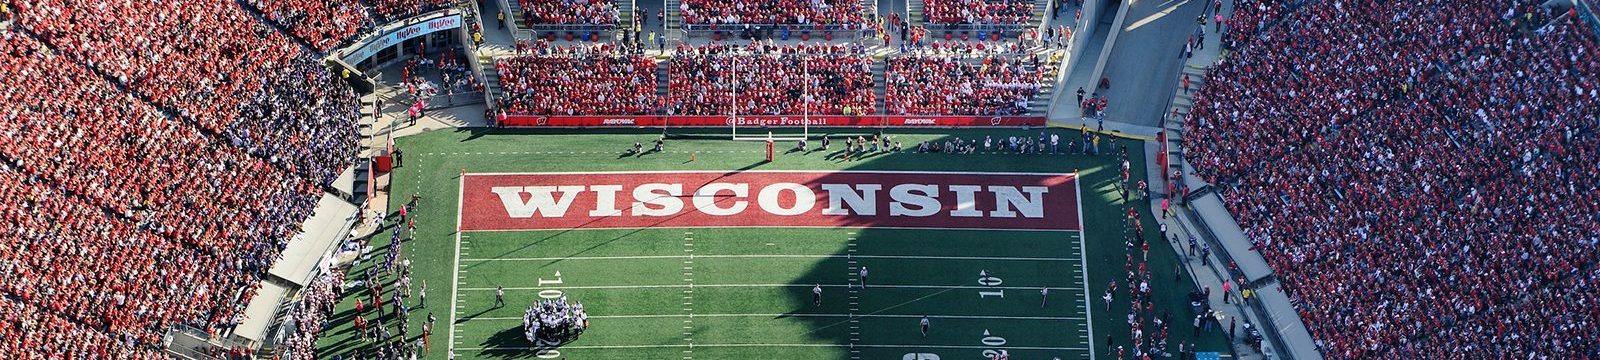 Aerial photo of the Camp Randall end zone during a Badger game with the stands filled with fans dressed in red